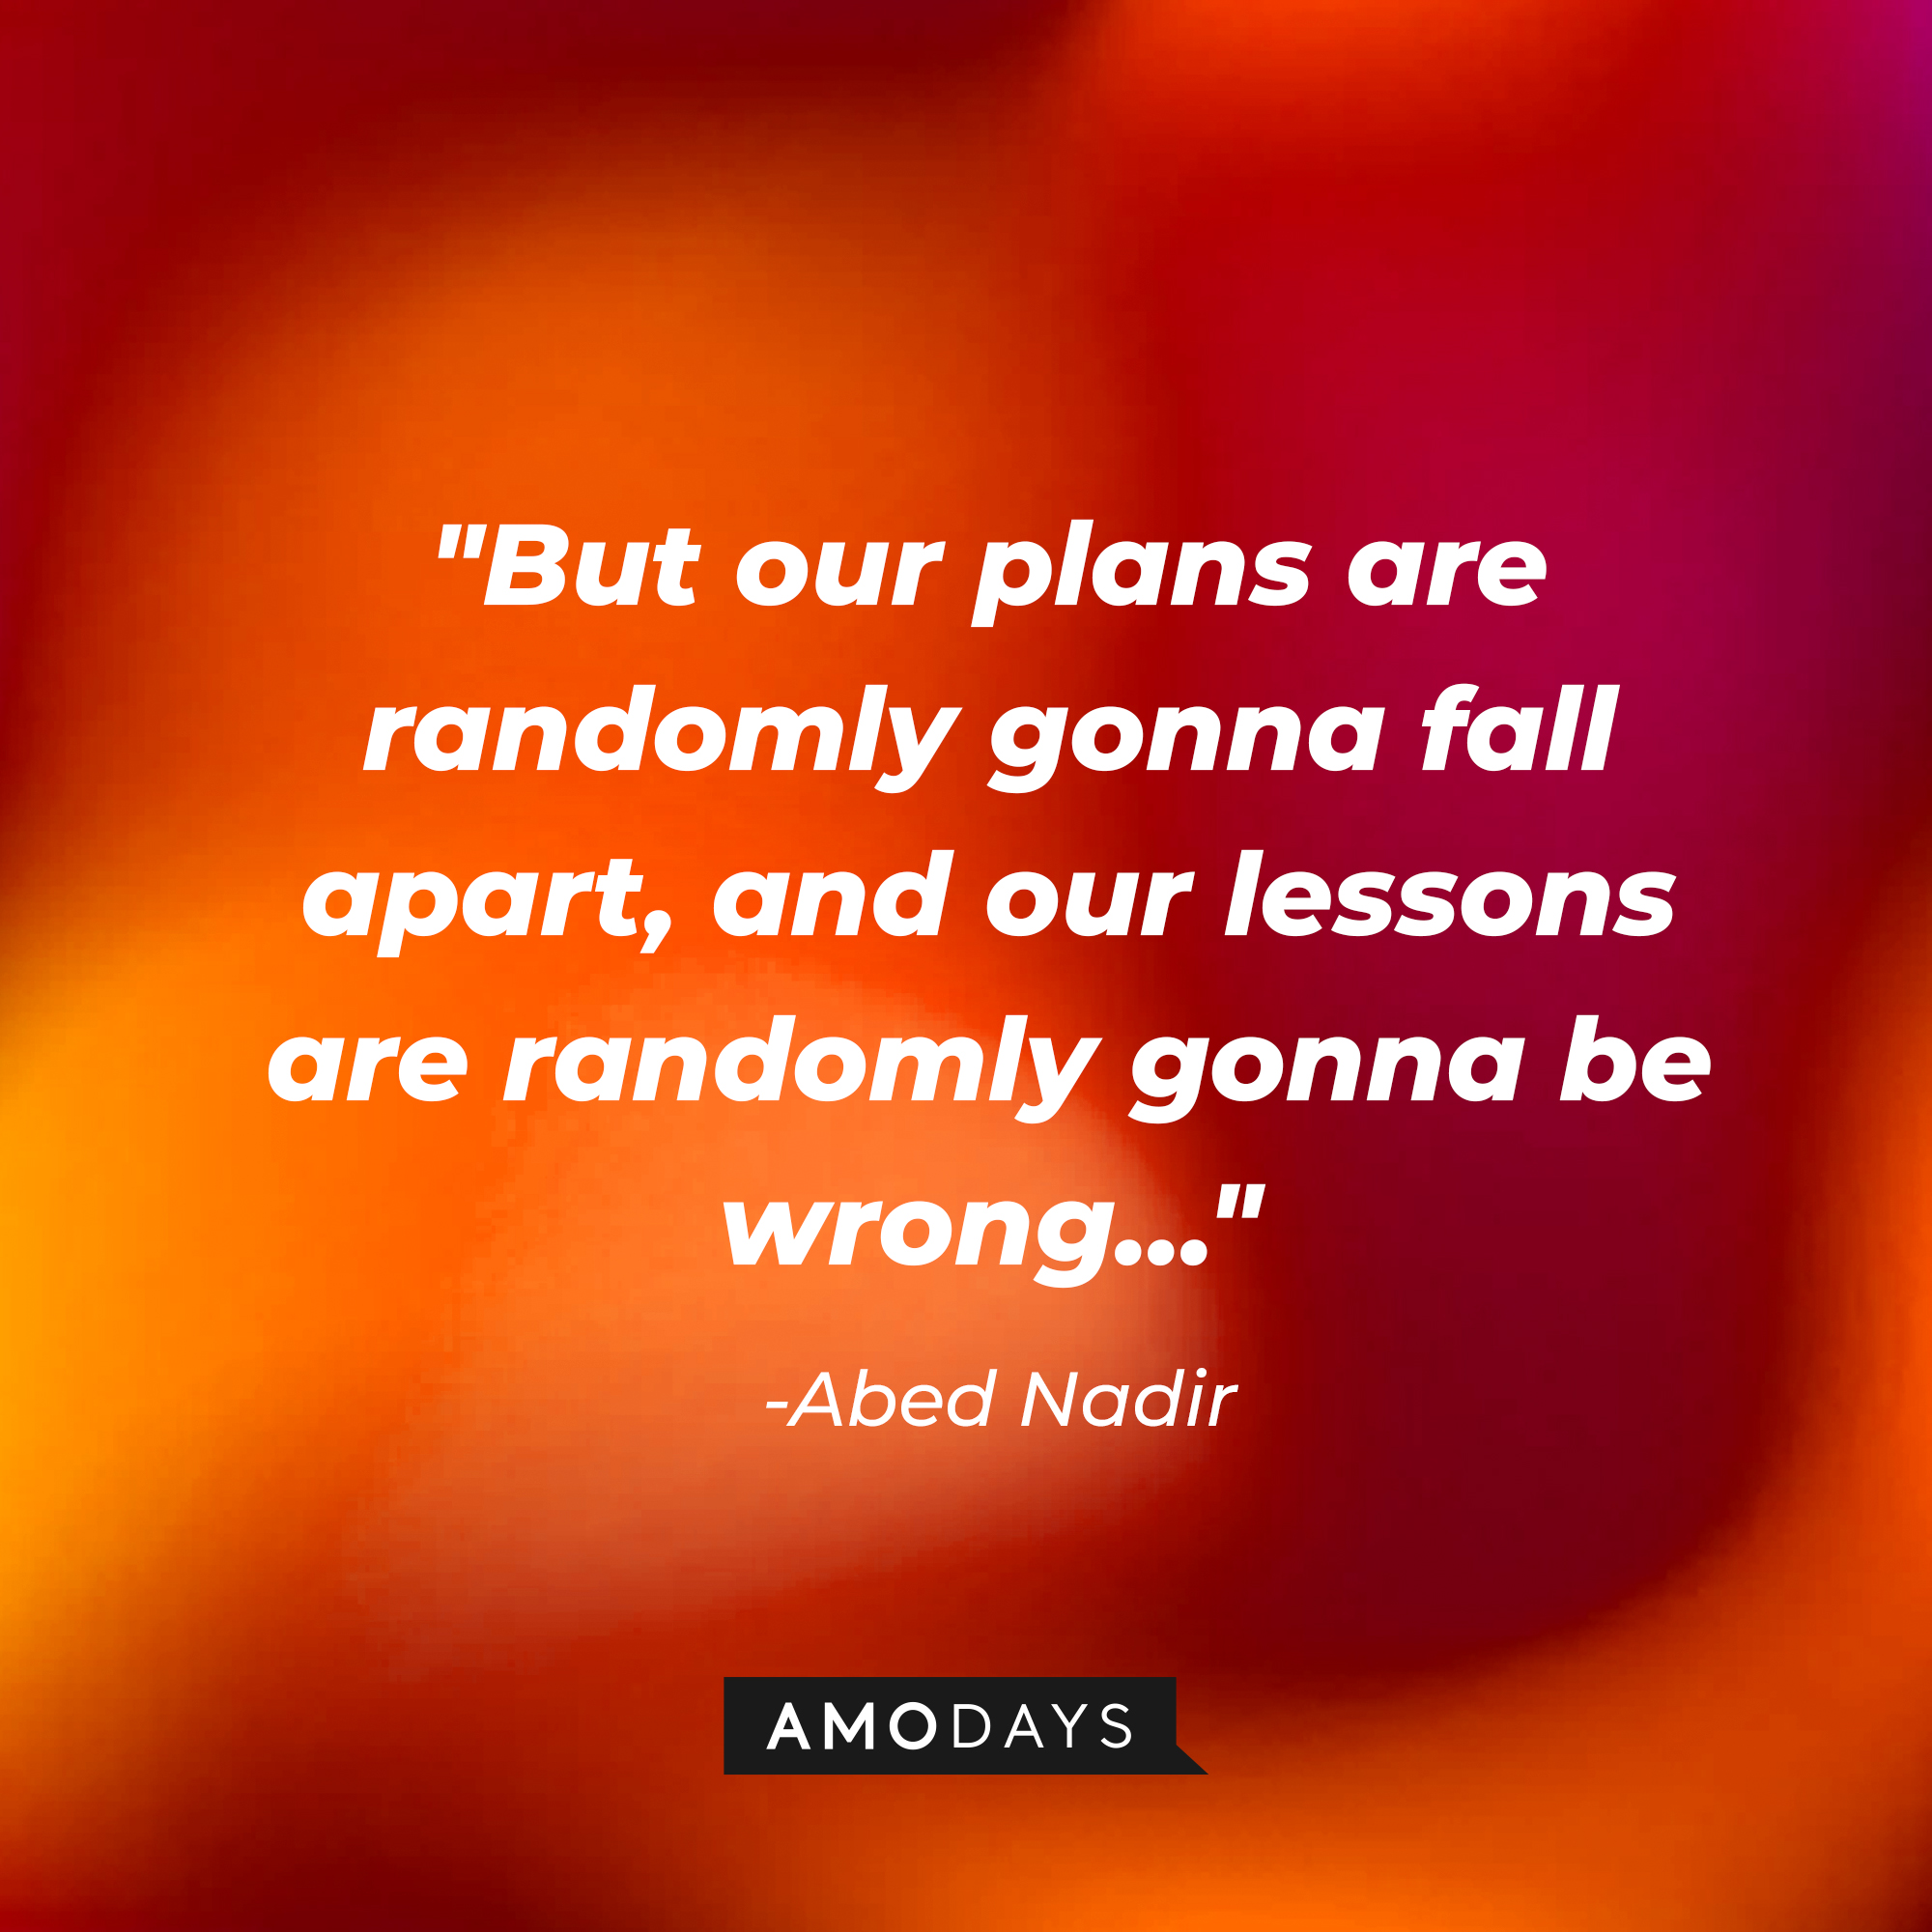 Abed Nadir’s quote: “But our plans are randomly gonna fall apart, and our lessons are randomly gonna be wrong…" | Source: AmoDays